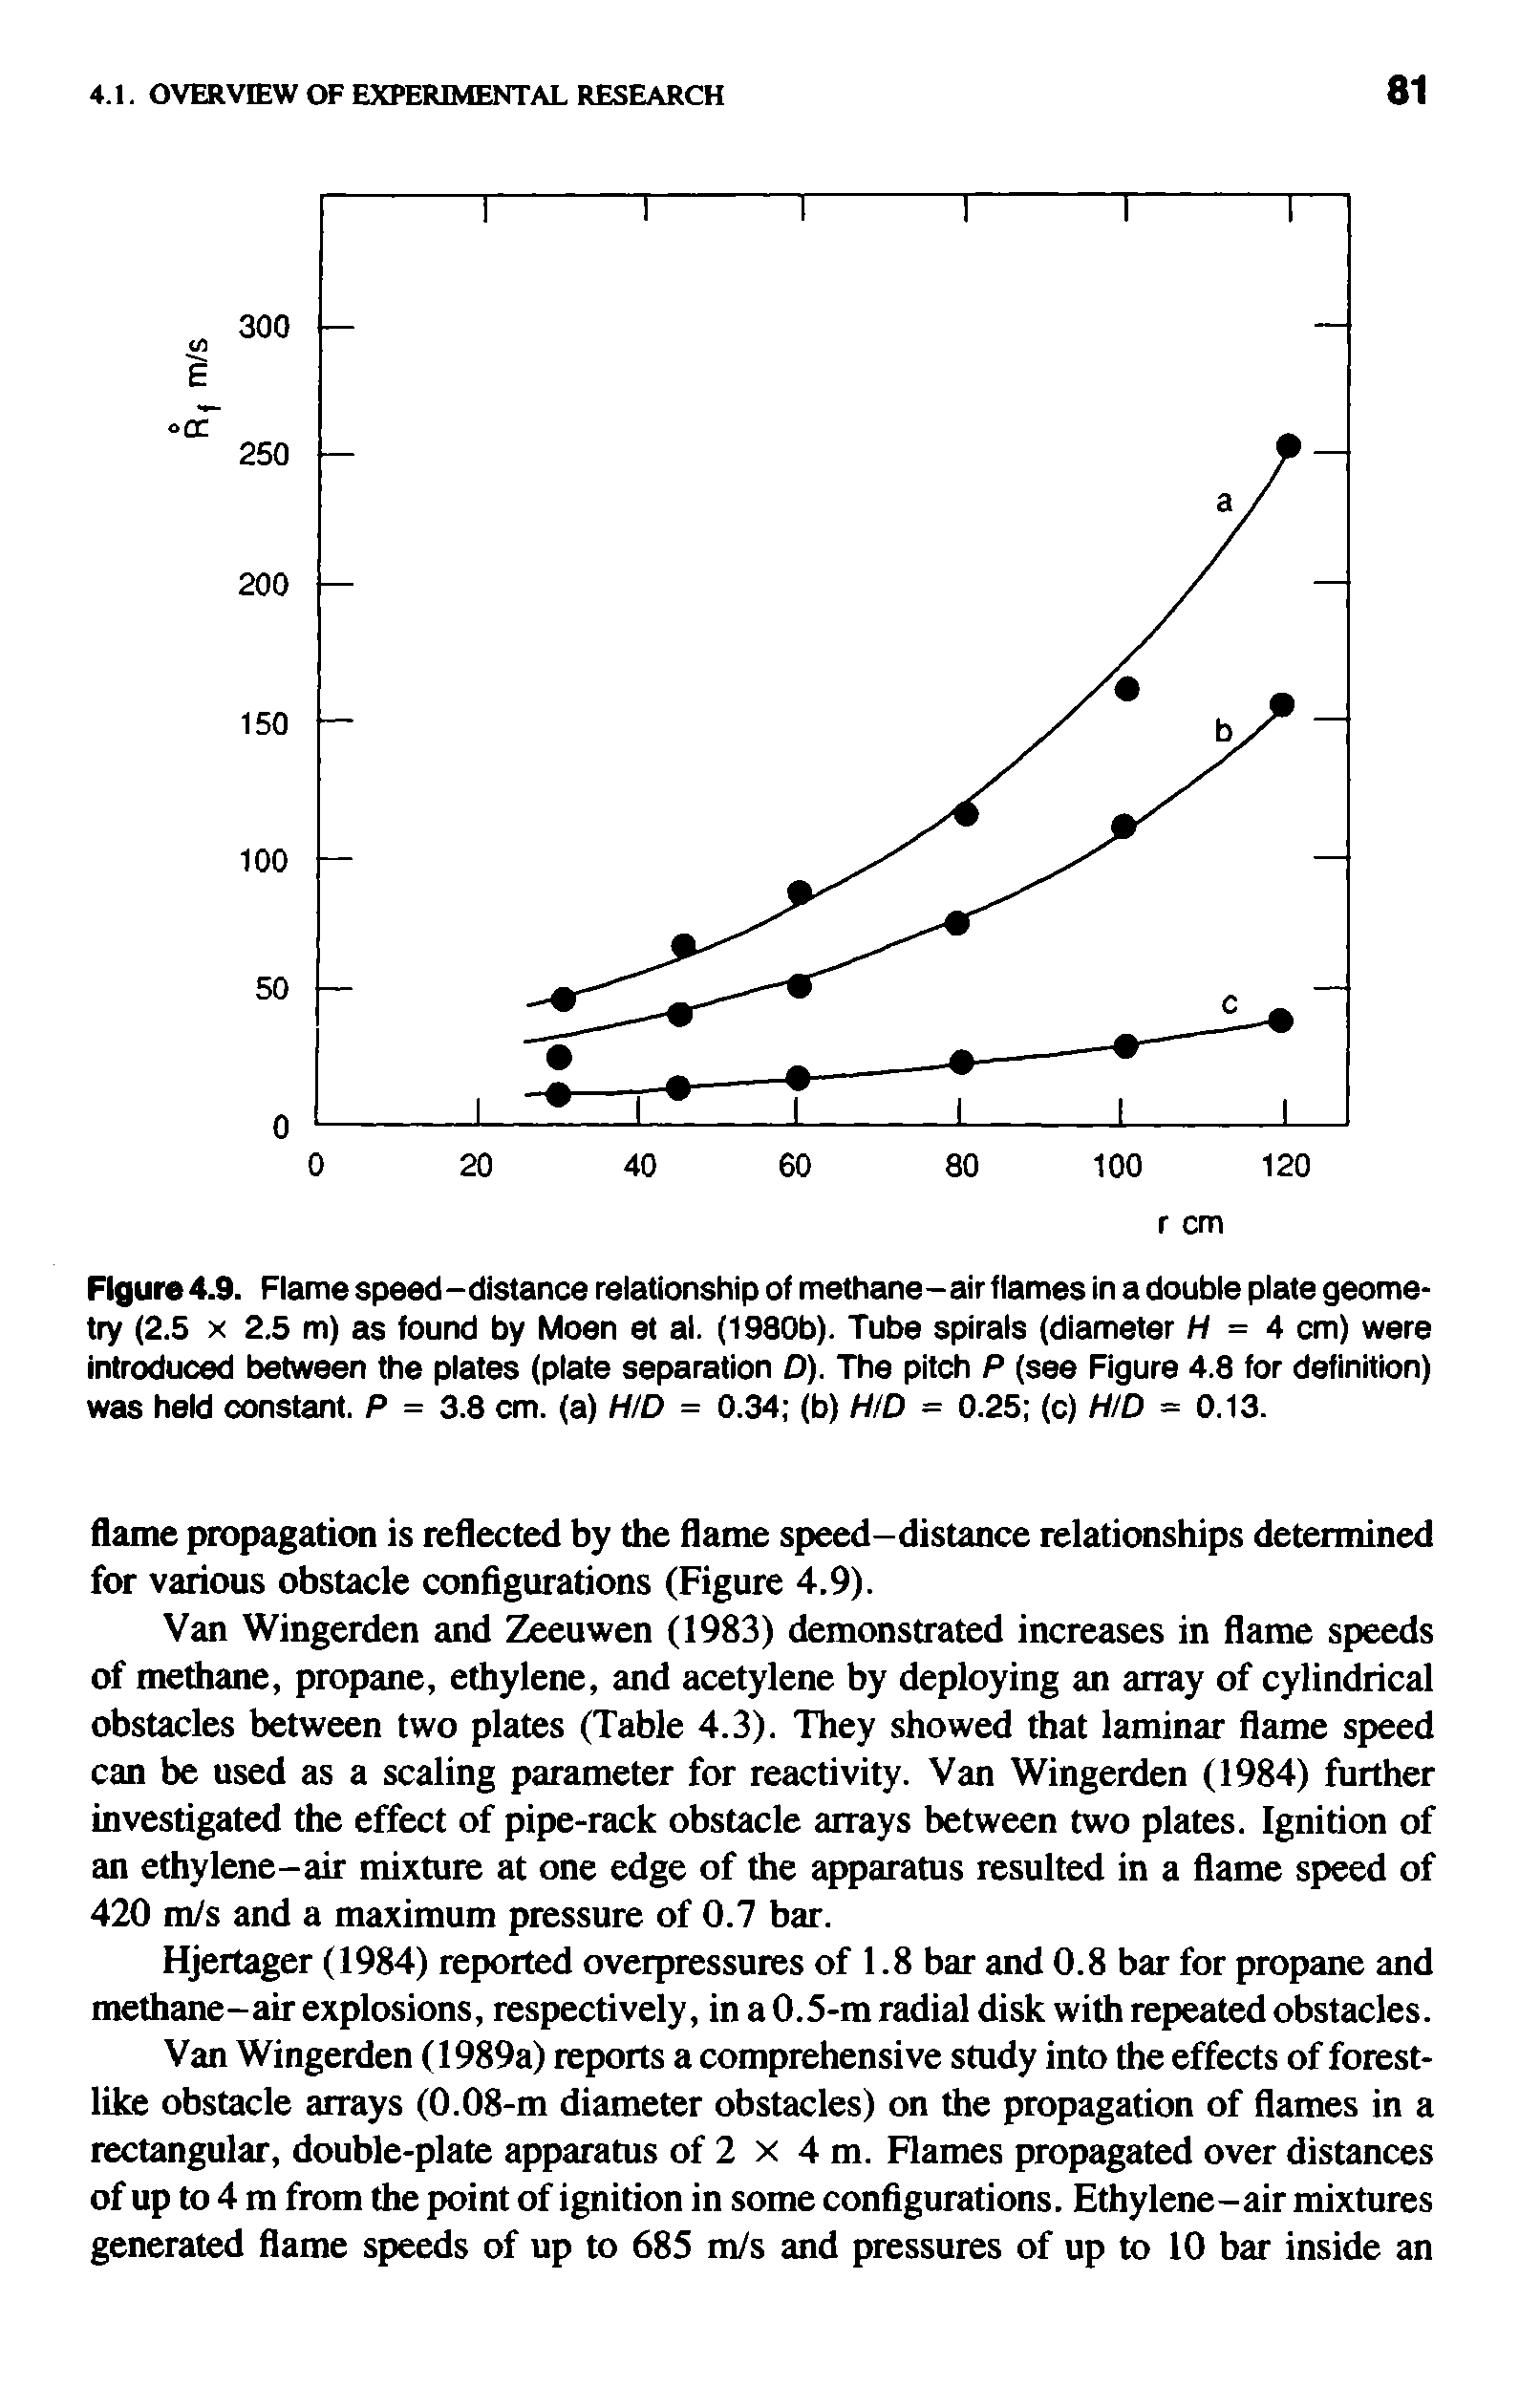 Figure 4.9. Flame speed-distance relationship of methane-air fiames in adoubie piate geometry (2.5 X 2.5 m) as found by Moen et al. (1980b). Tube spirals (diameter H = 4 cm) were introduced between the plates (plate separation D). The pitch P (see Figure 4.8 for definition) was held constant. P = 3.8 cm. (a) H/D = 0.34 (b) HID = 0.25 (c) H/D = 0.13.